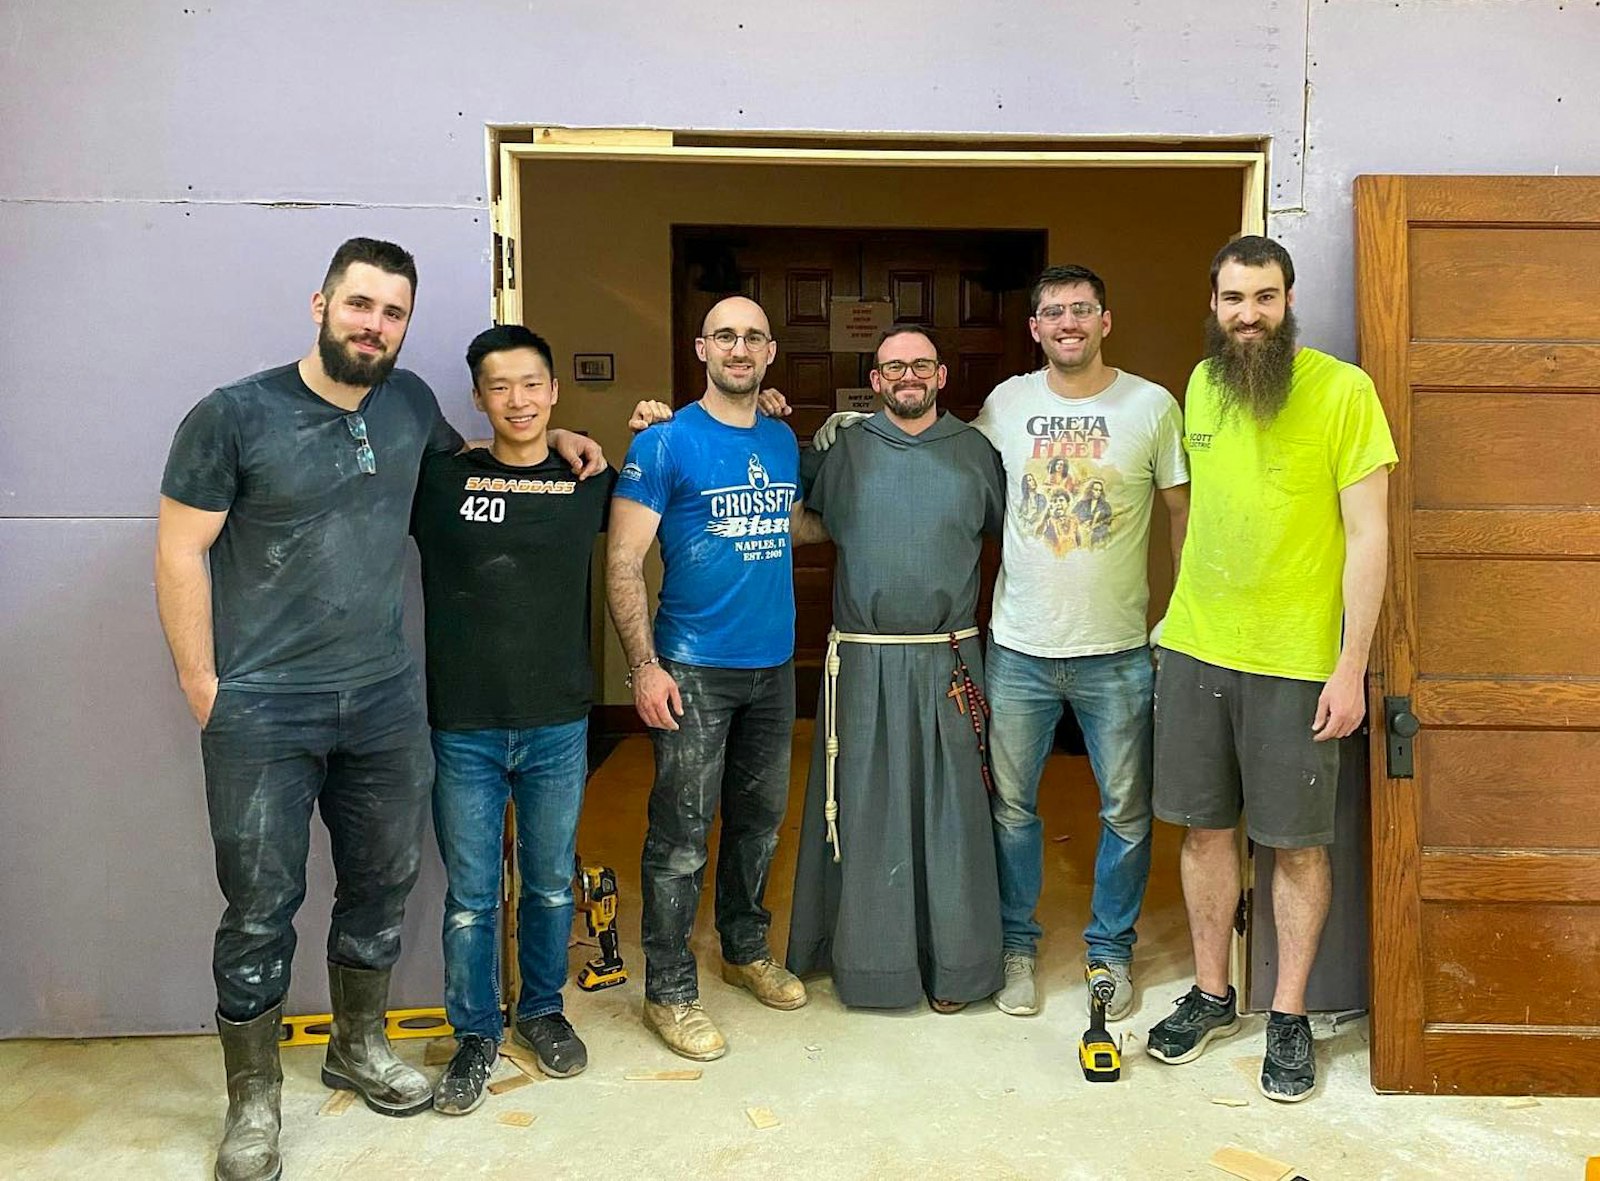 Fr. Fornwalt, center, and a group of friars and parishioners began work on the new adoration chapel this summer. The idea sprang from a series of conversations about how best to use space in a former convent on the parish's property.